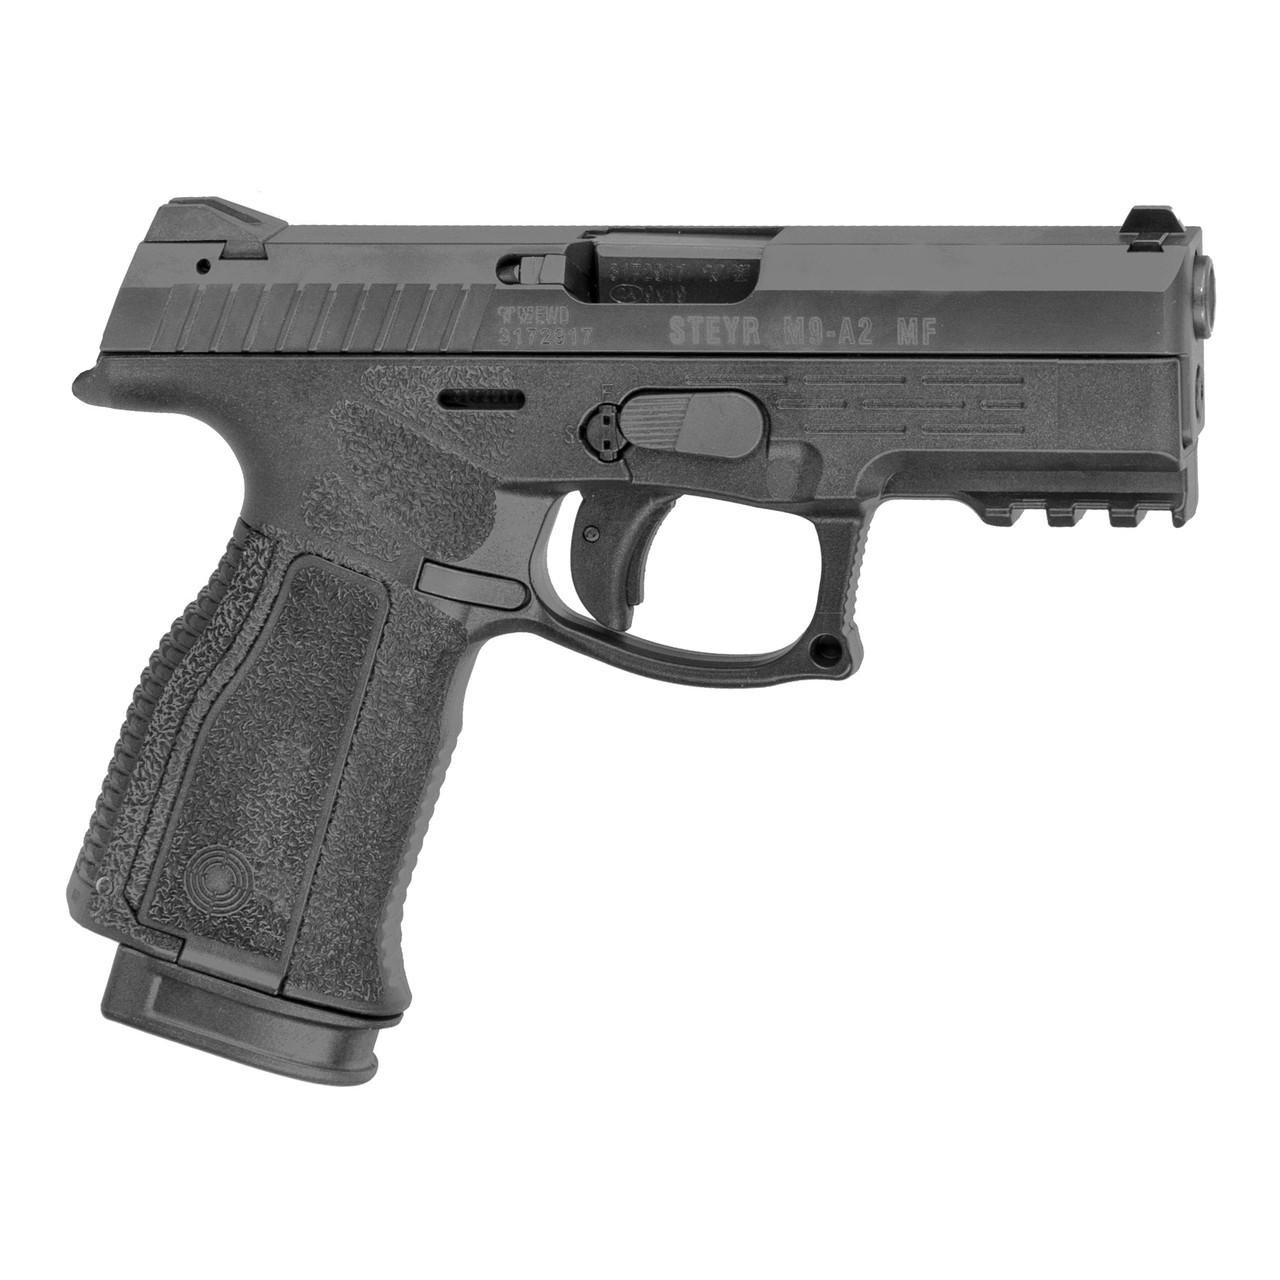 Steyr Arms M9-A2 MF 9MM Pistol - $399.98 (Free S/H over $100)